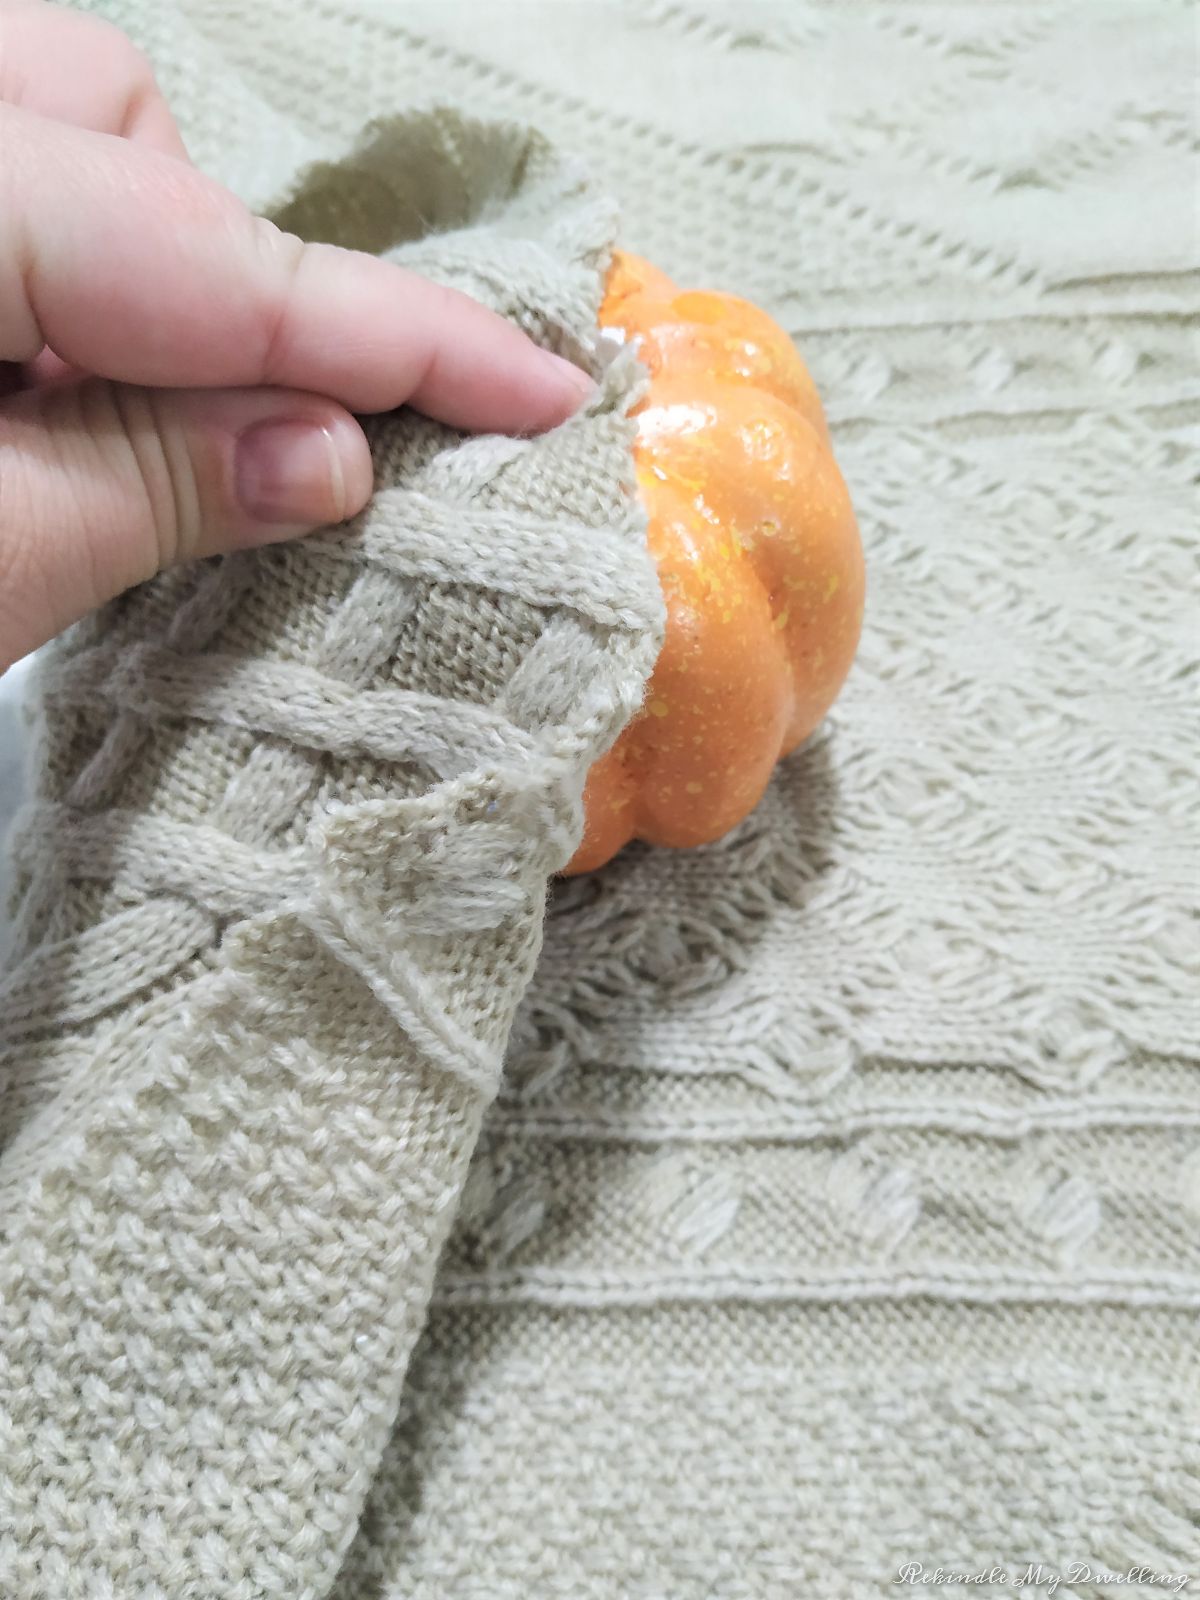 Wrapping a sweater around the foam pumpkin.